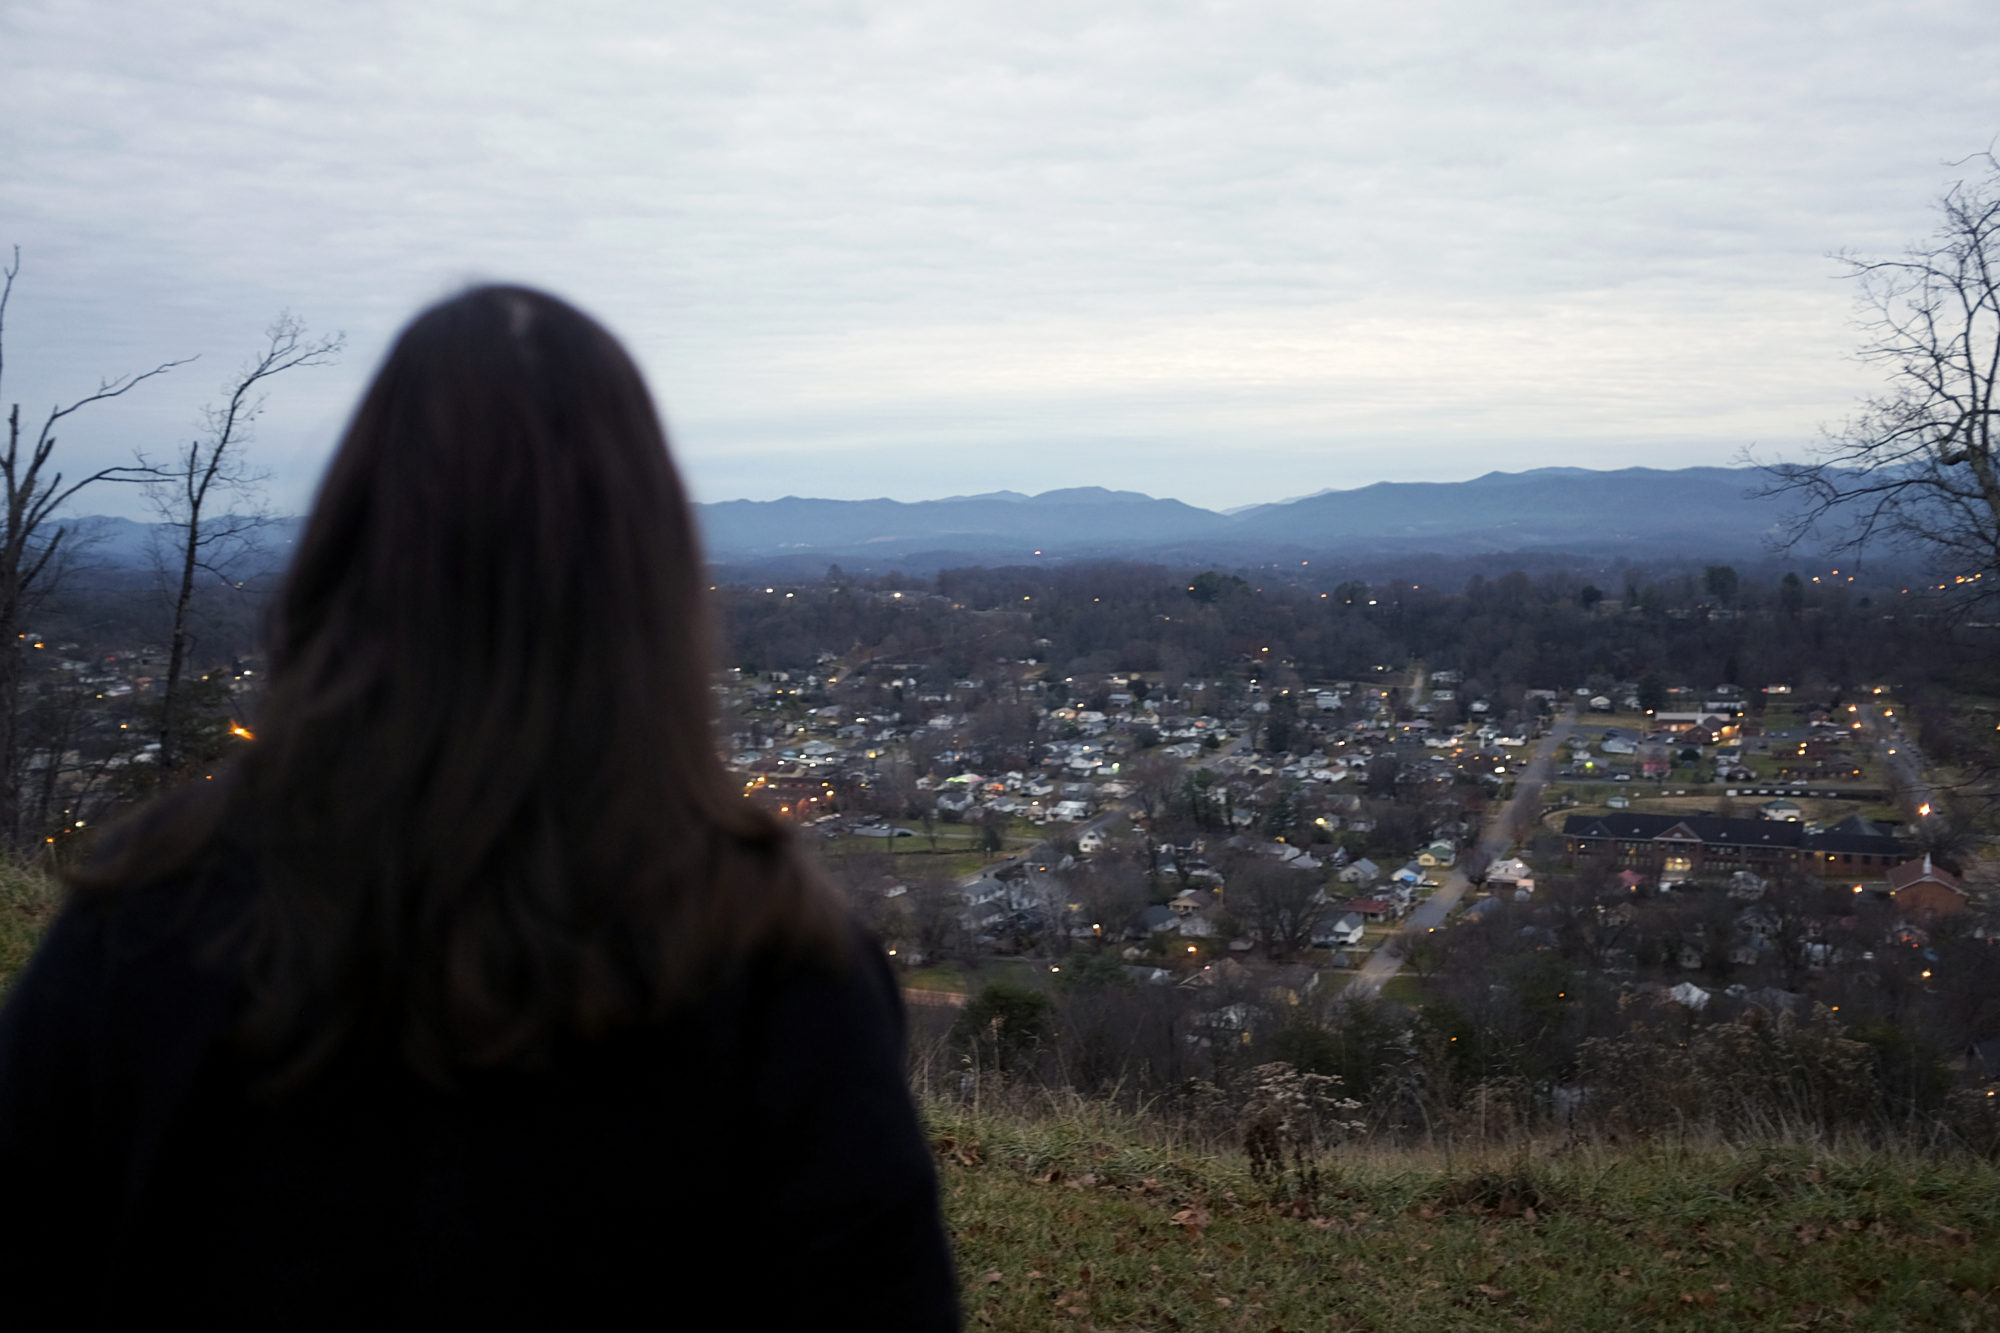 Alyssa looks out over Tannery Knobs Overlook